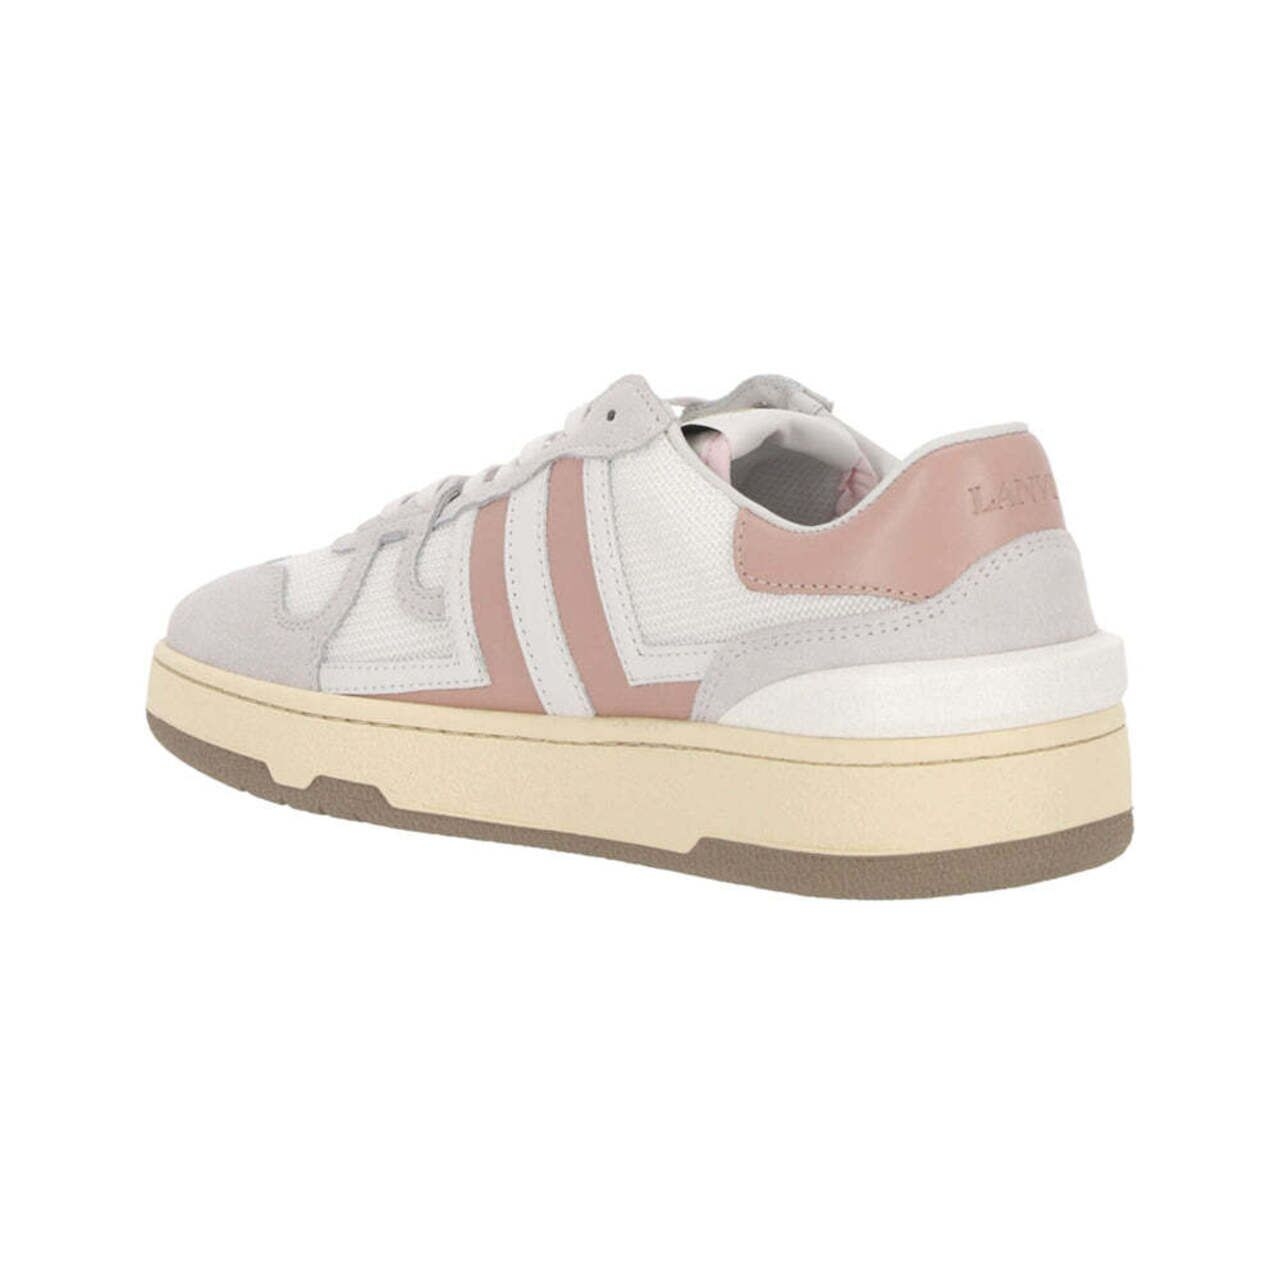 Lanvin Leather and Mesh Clay Low Top Sneakers White/Light Pink Women